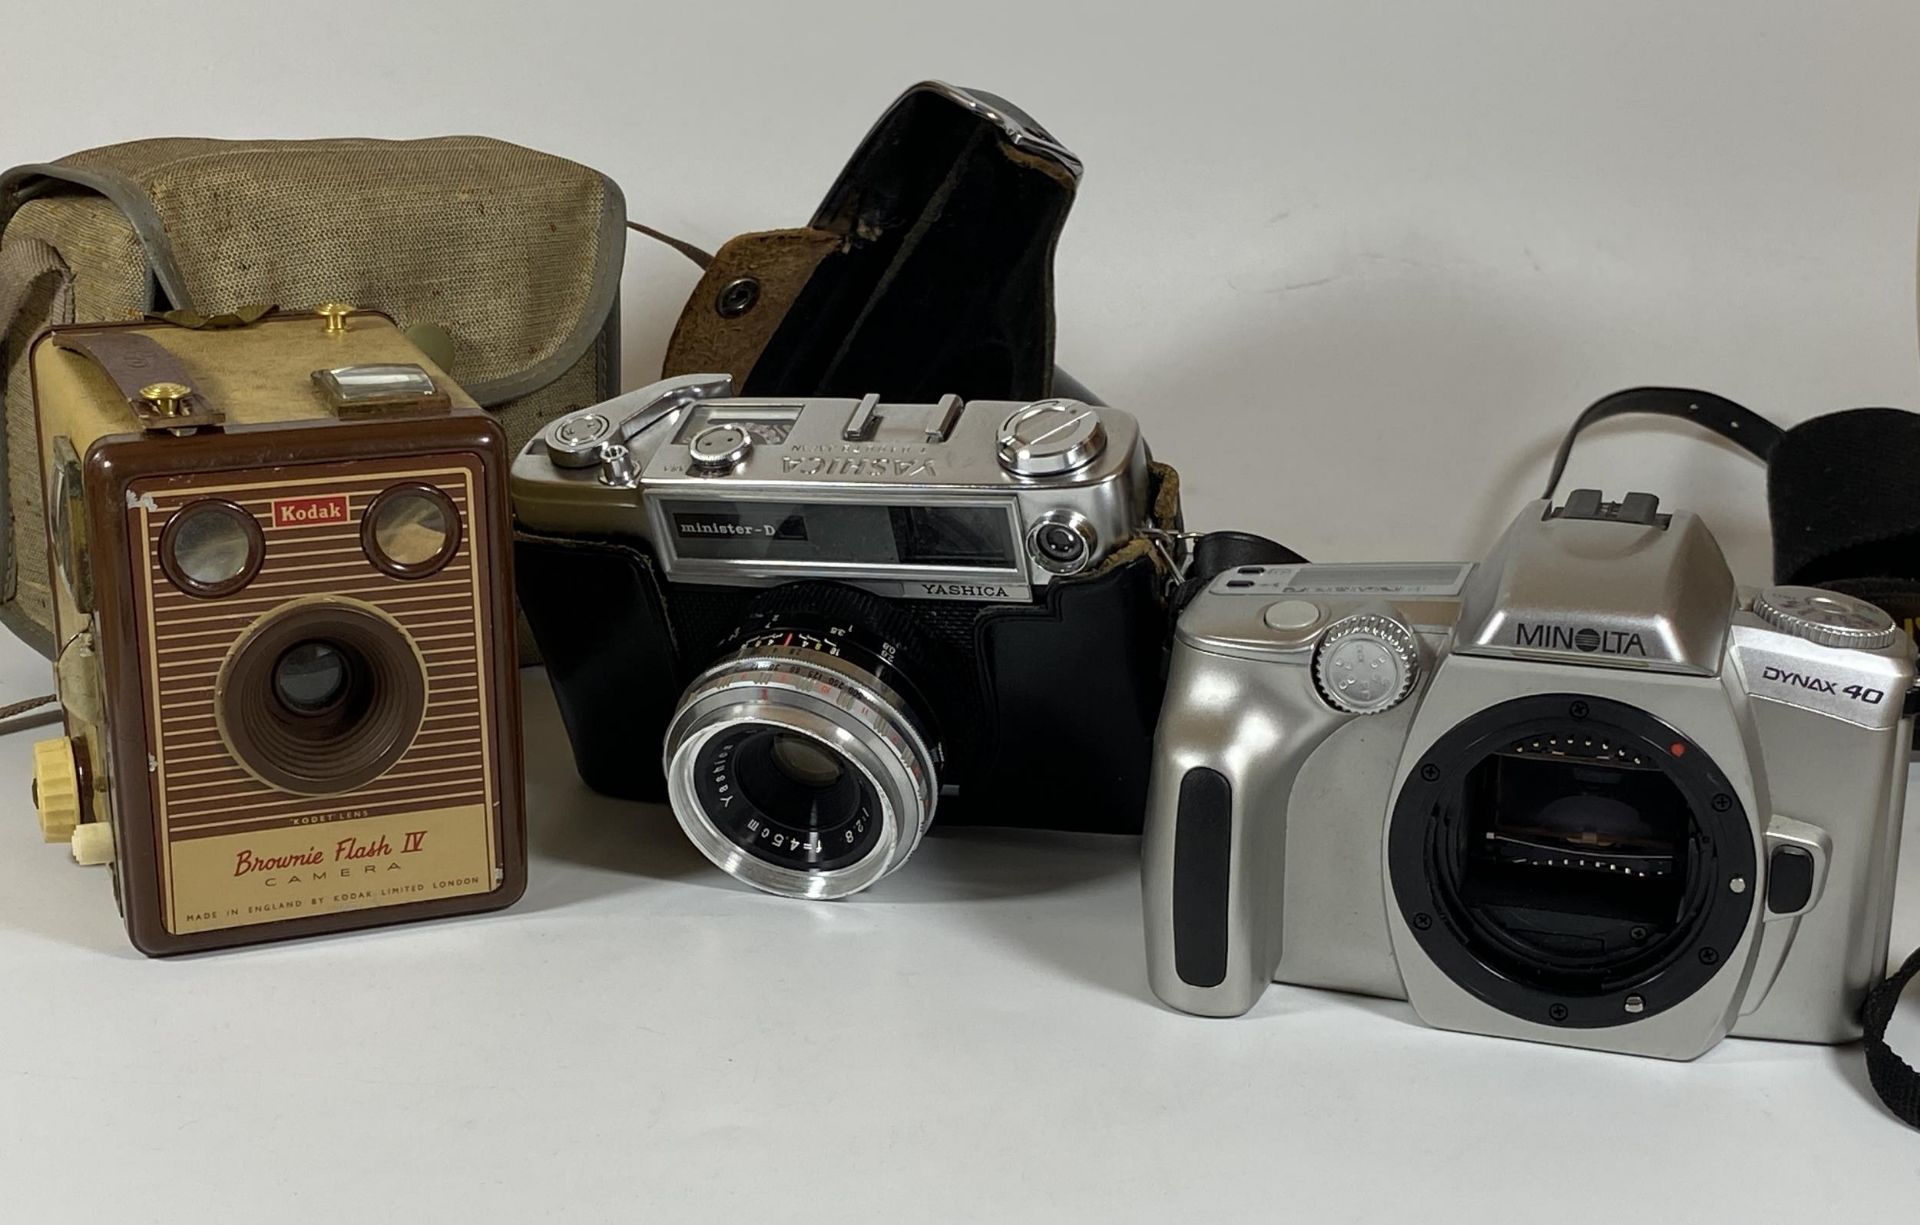 THREE VINTAGE CAMERAS - CASED KODAK BROWNIE FLASH IV, YASHICA MINISTER-D FITTED WITH 45MM LENS AND A